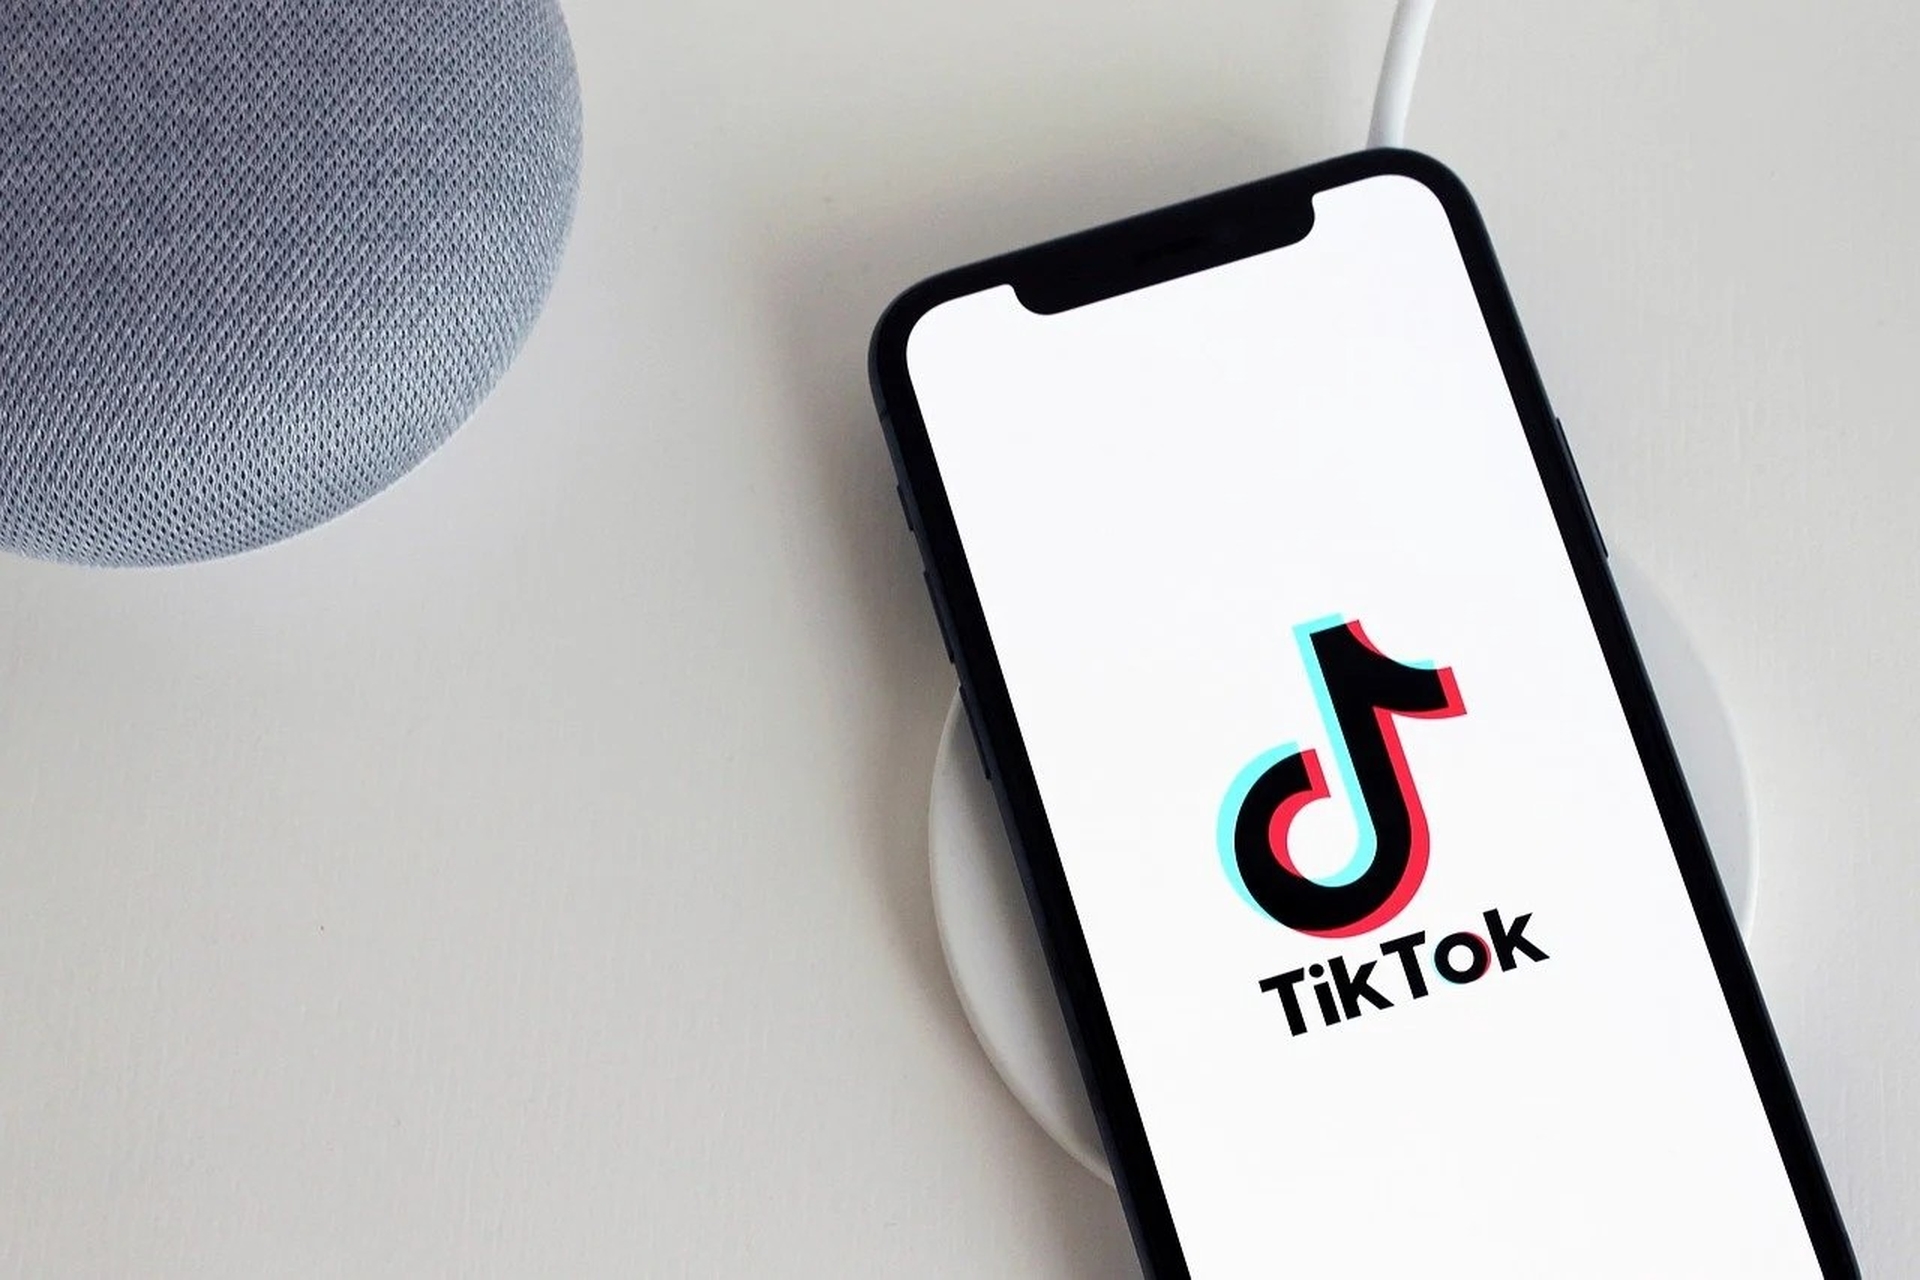 In this article, we are going to go over how to get the Glow Filter TikTok, so you can use this new filter and take great photos with it.